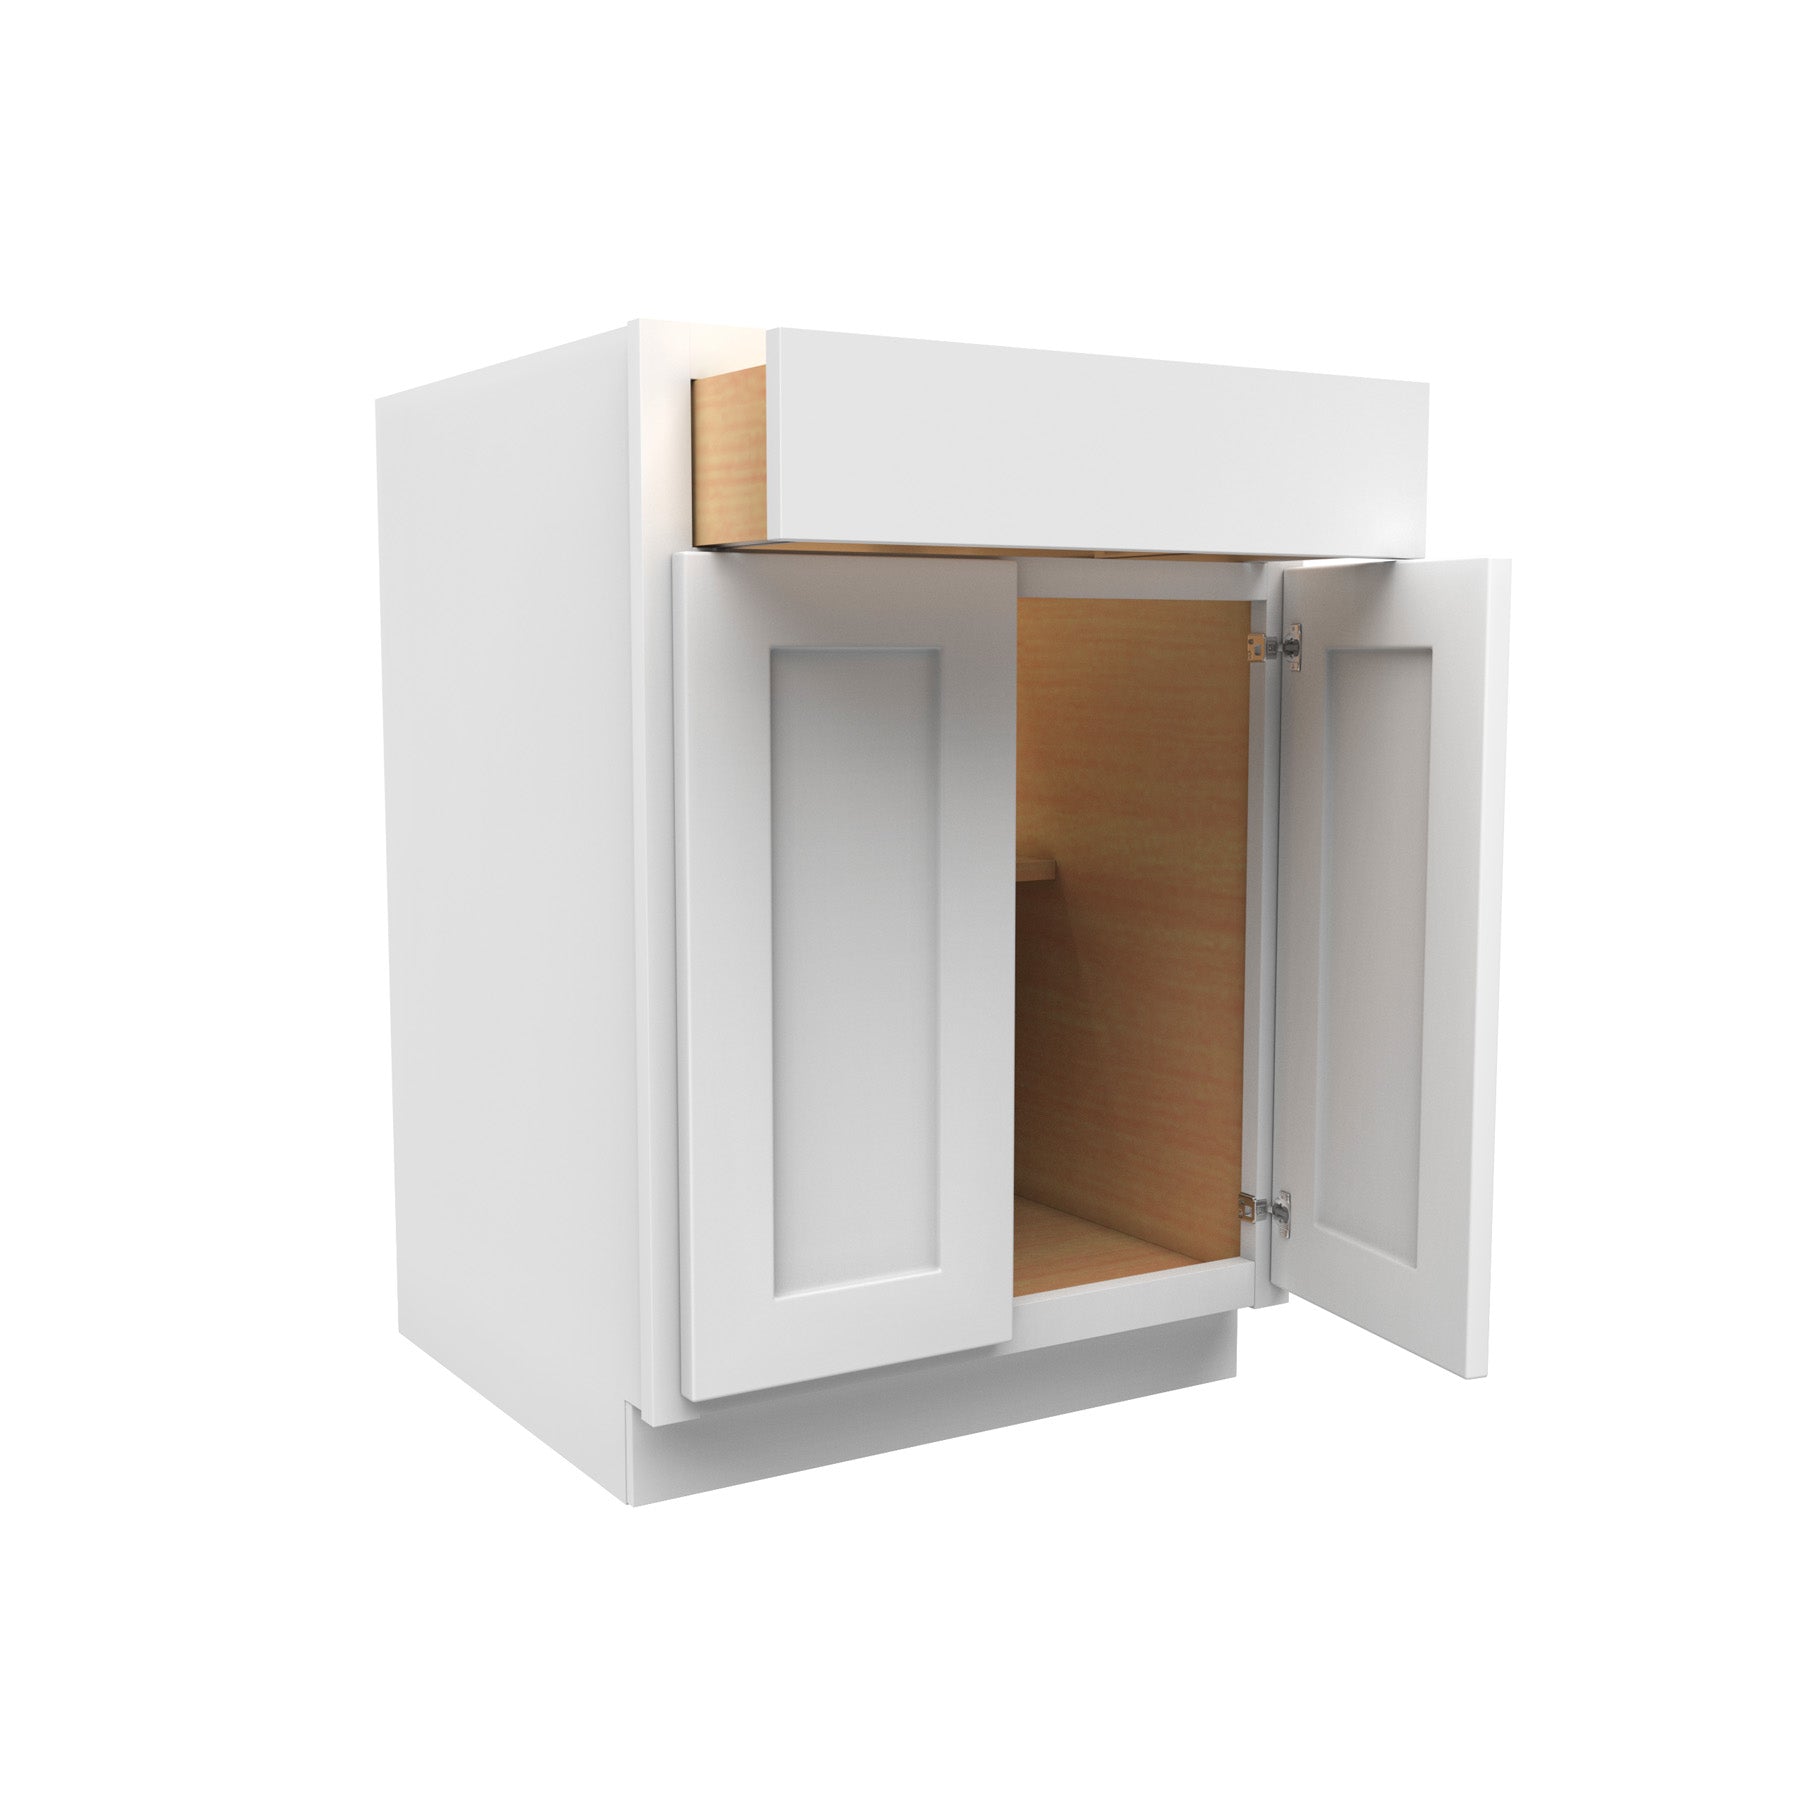 24 Inch Wide Double Door Base Cabinet - Luxor White Shaker - Ready To Assemble, 24"W x 34.5"H x 24"D